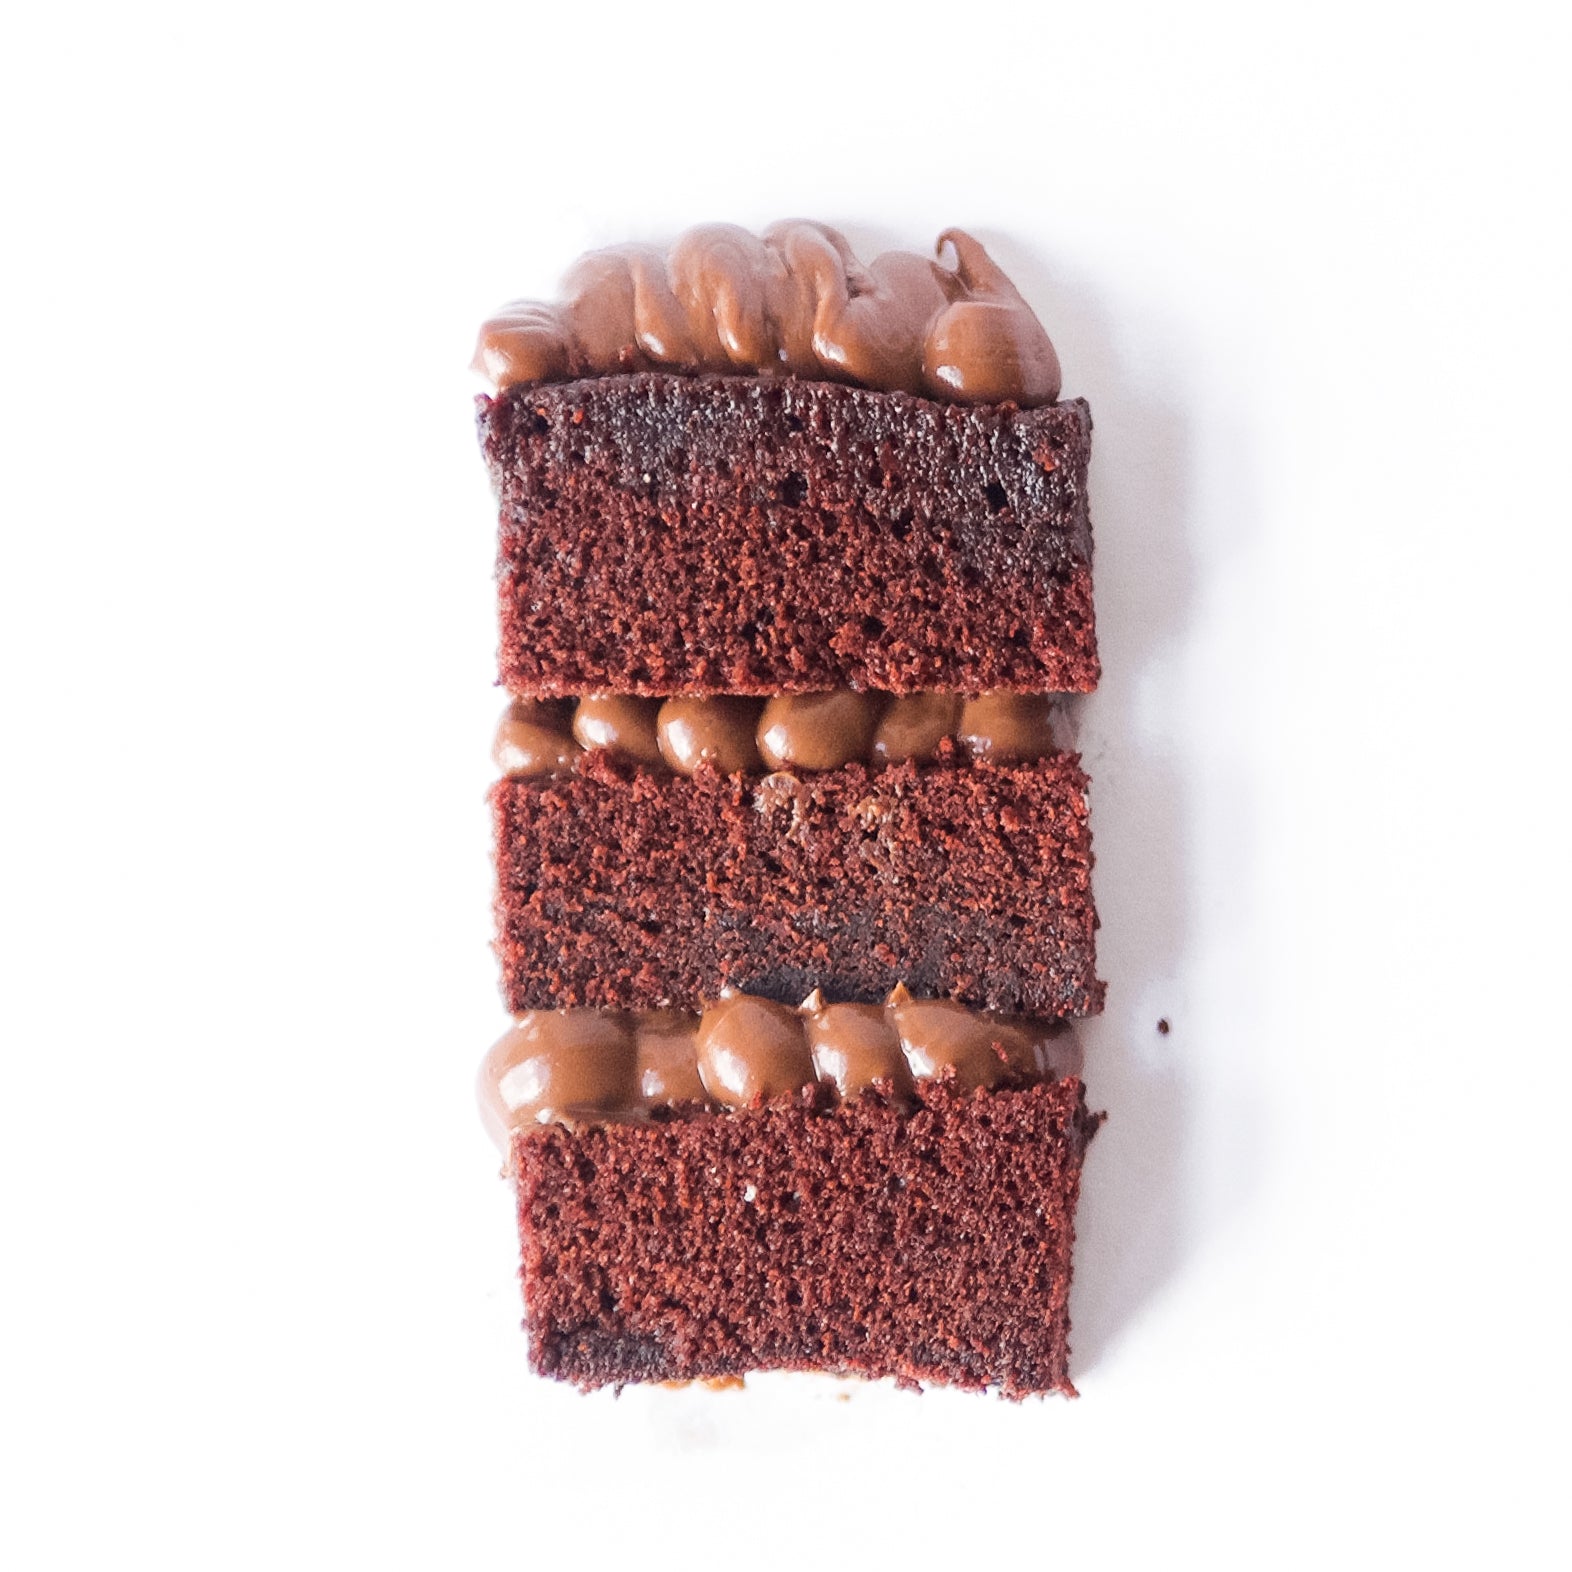 Kinder Chocolate Cake | Free Gift & Delivery